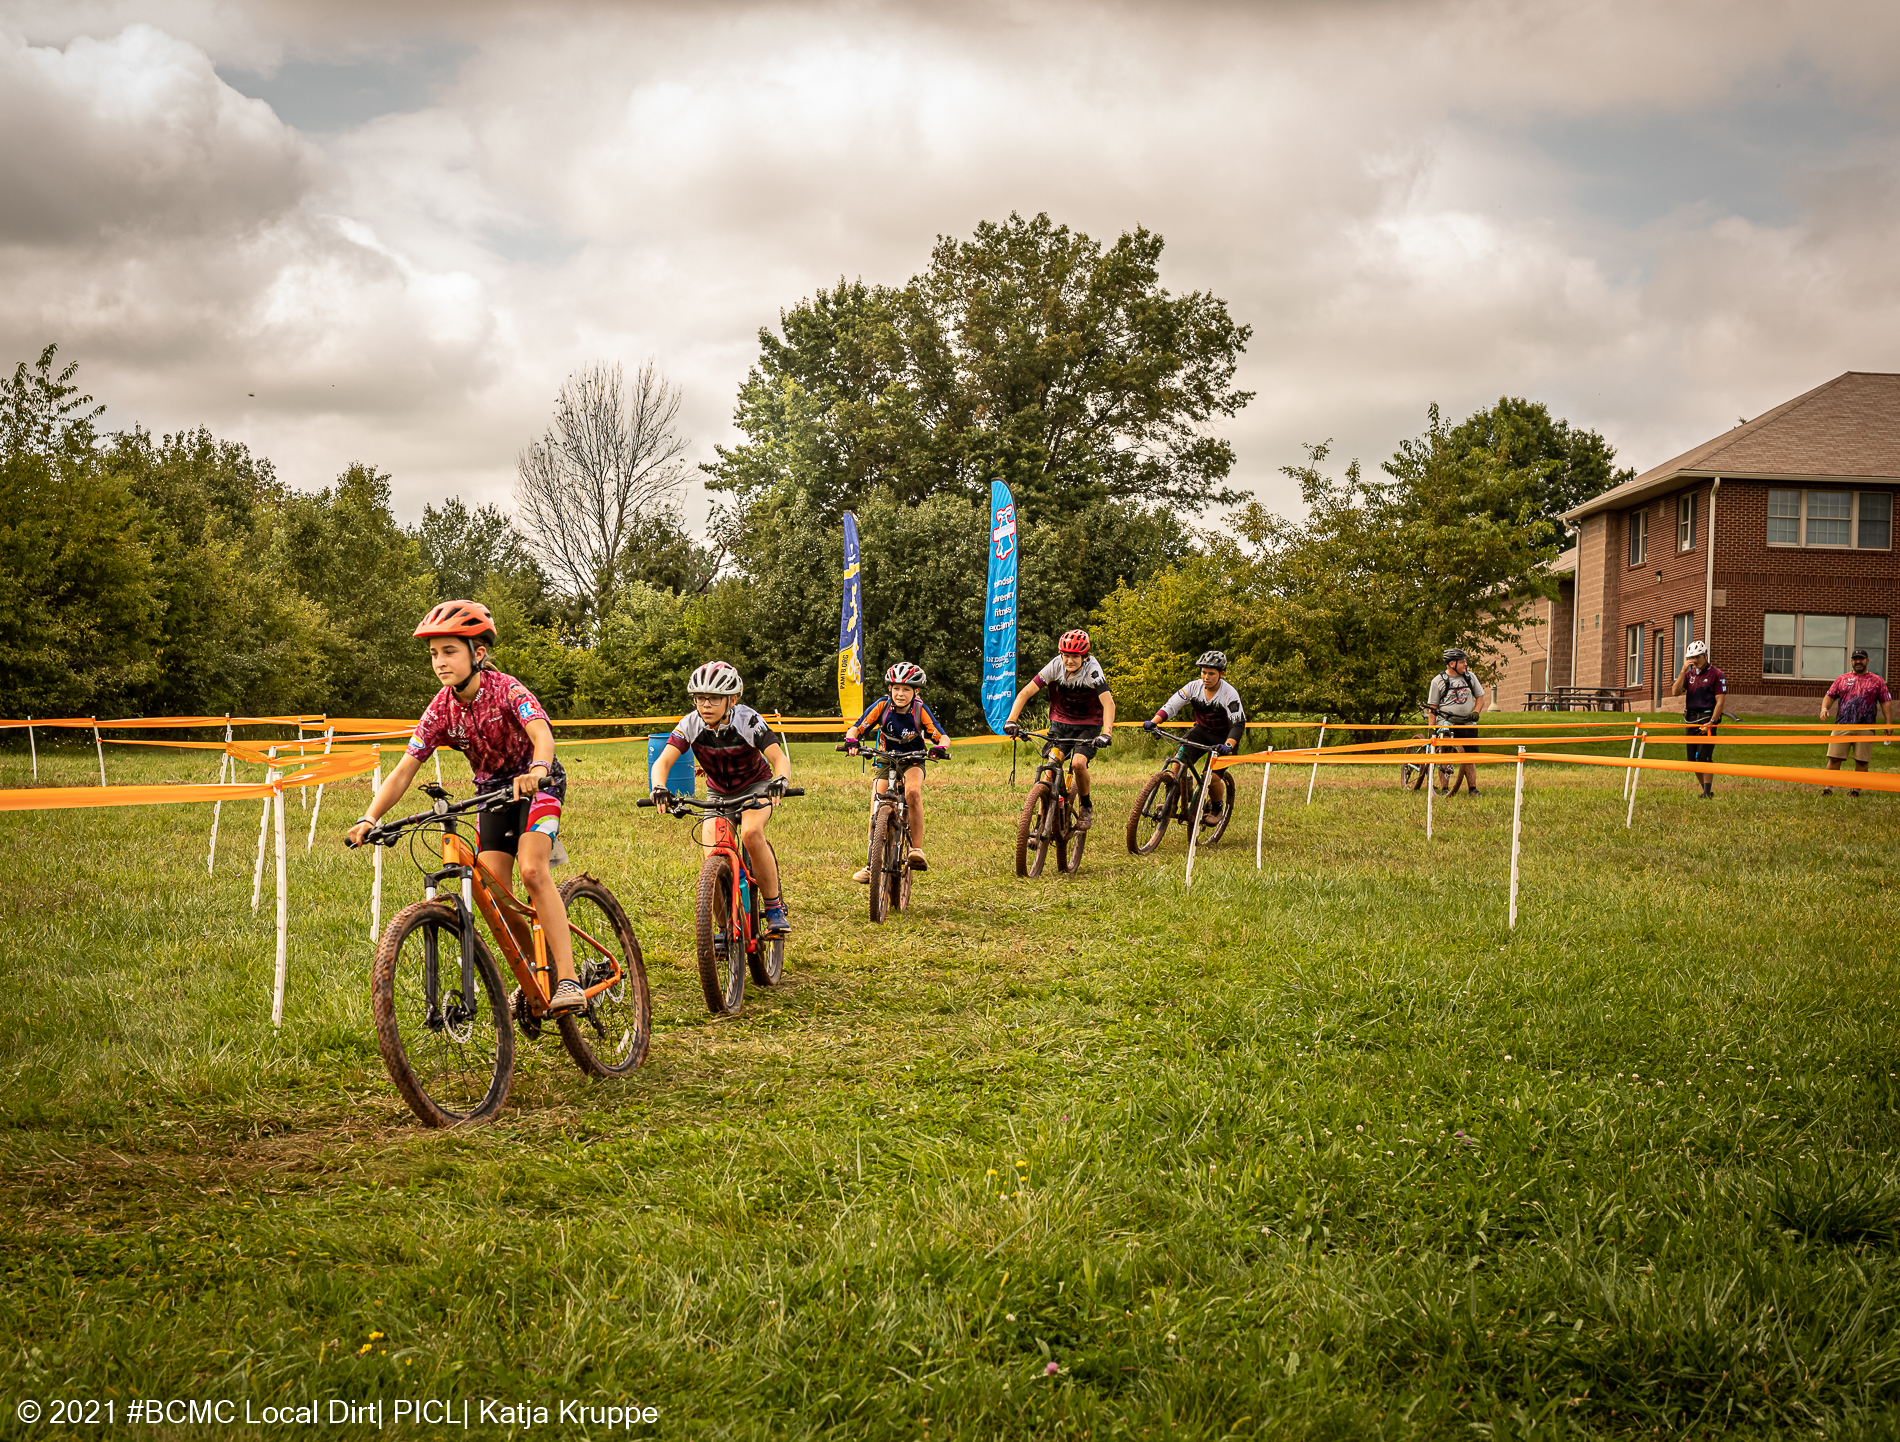 Blue Comet Scramble and Intro to MTB event this weekend